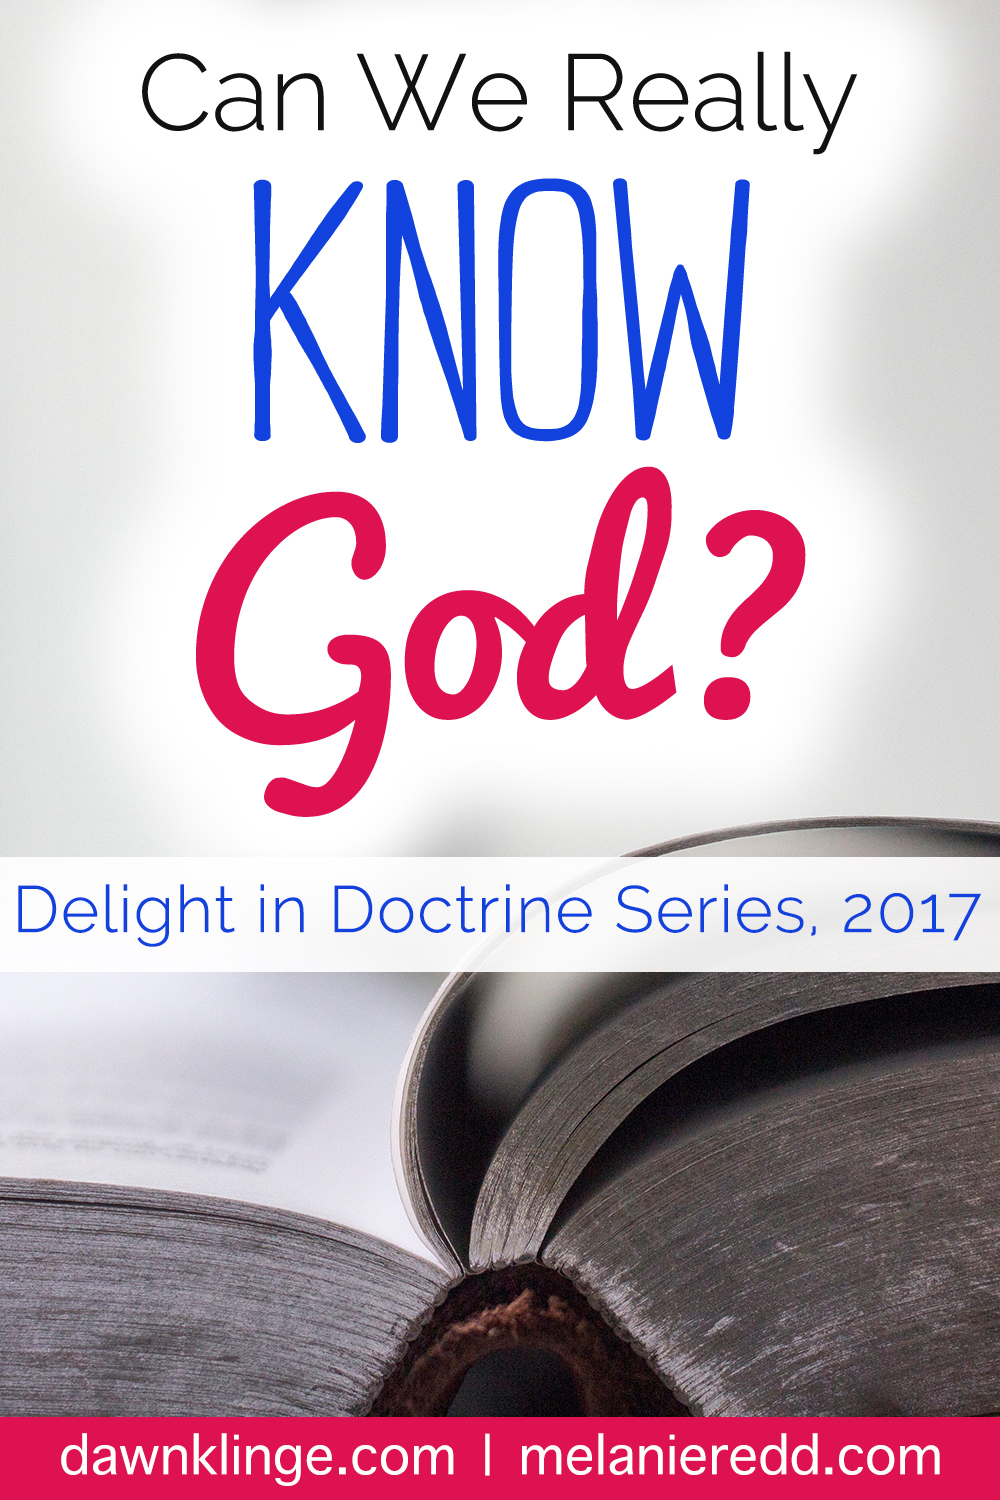 Can we REALLY know God? Is it possible to have a personal relationship with Him? If so, how can we know Him? This article will address and answer all of these questions. Why not stop by for the discussion?